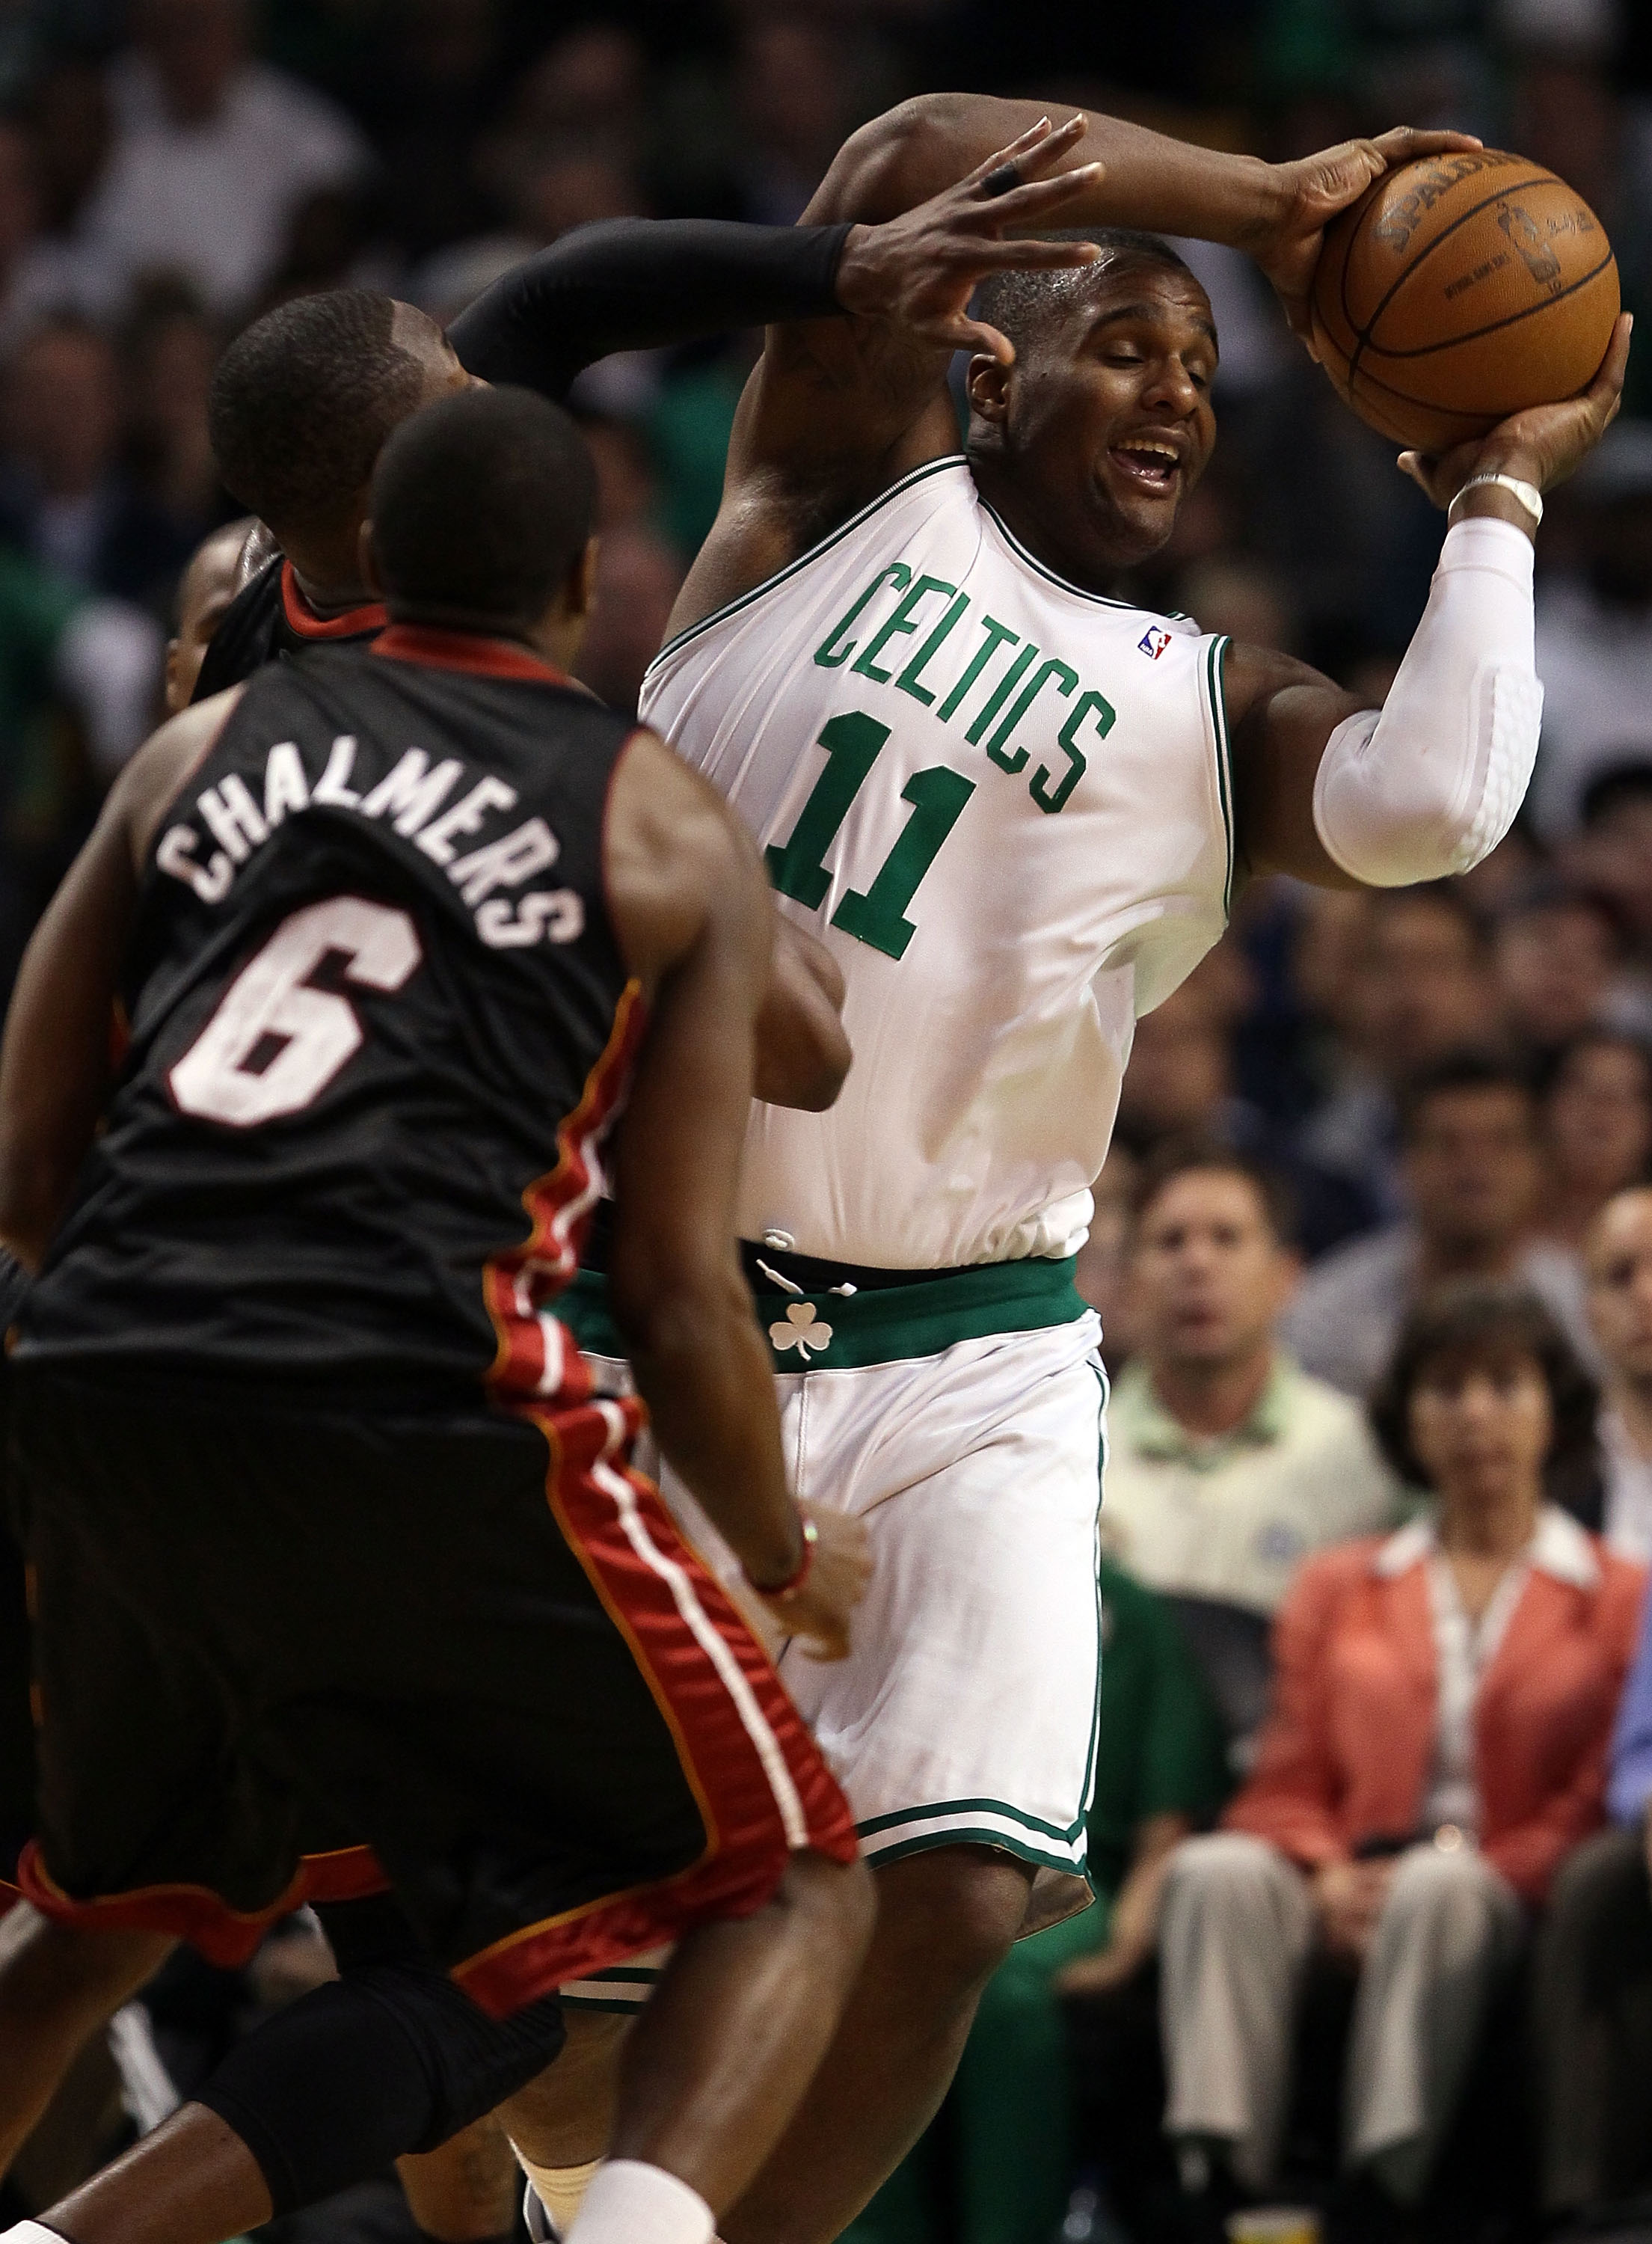 BOSTON - APRIL 27:  Glen Davis #11 of the Boston Celtics triest to keep the ball from Dwyane Wade #3 and Mario Chalmers #6 of the Miami Heat during Game Five of the Eastern Conference Quarterfinals of the 2010 NBA playoffs at the TD Garden on April 27, 20